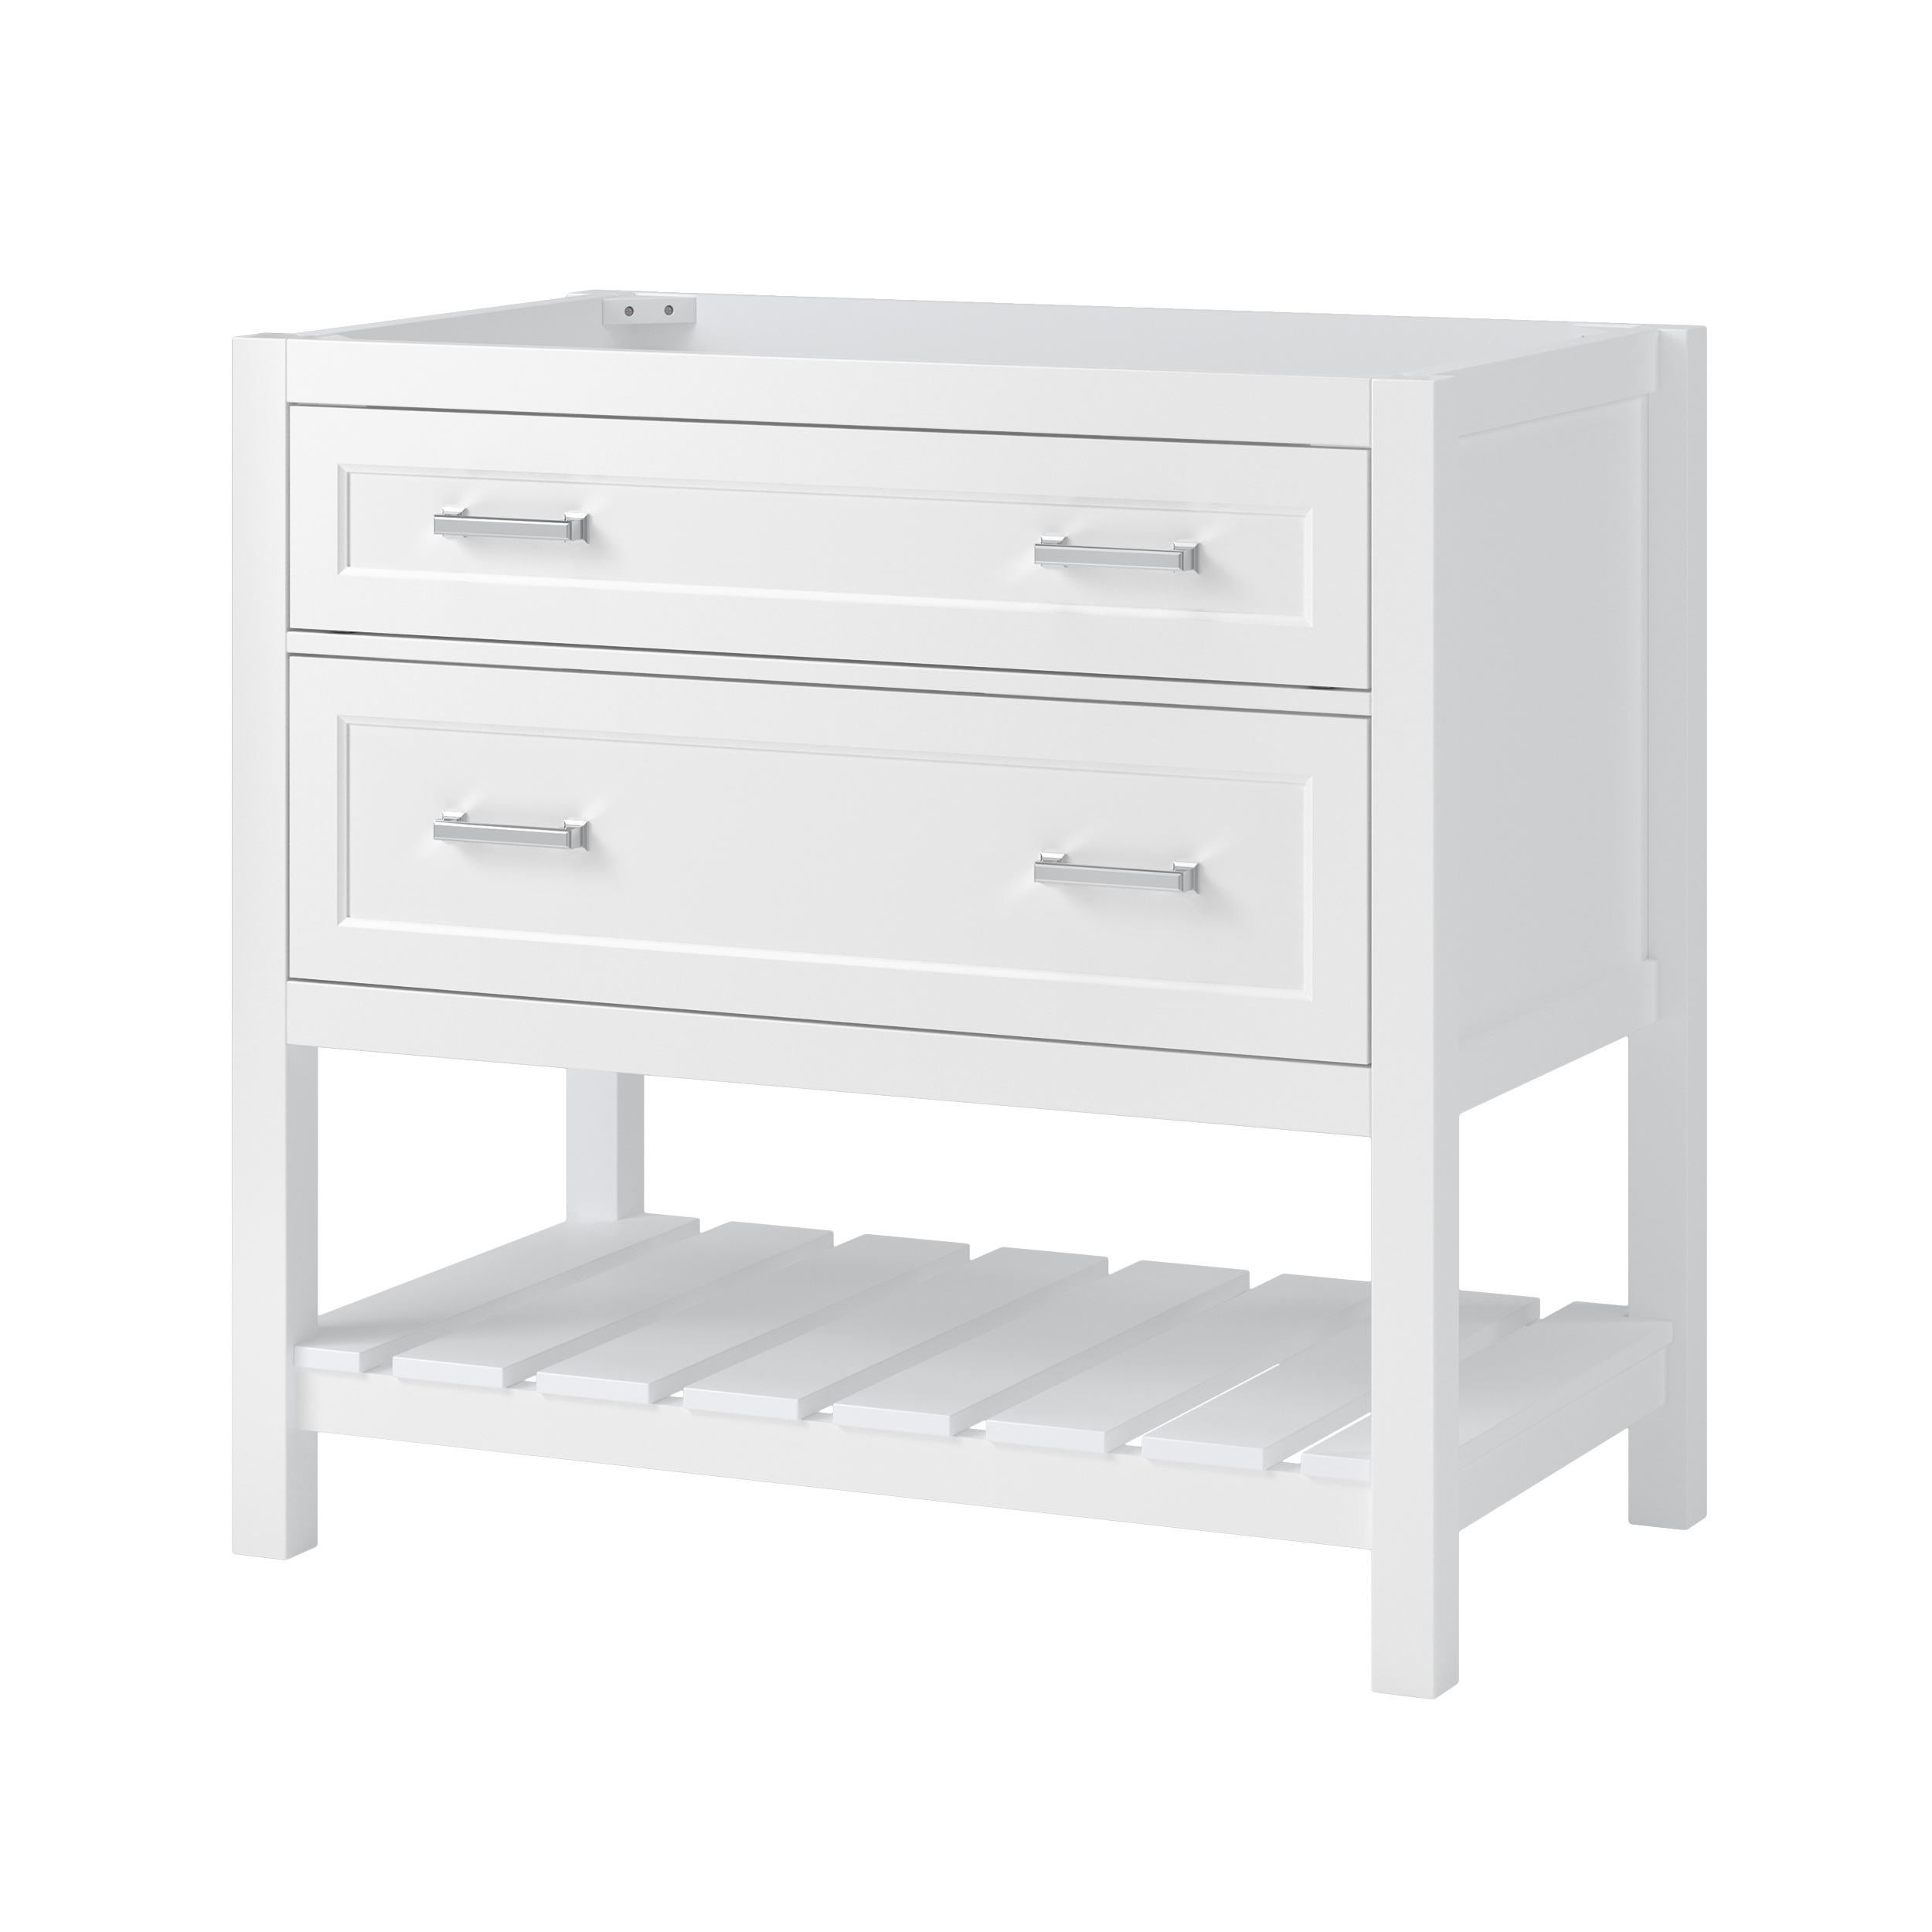 Lawson Series LSWV3622D Vanity Cabinet, 36 in W Cabinet, 21-1/2 in D Cabinet, 34 in H Cabinet, Wood, White